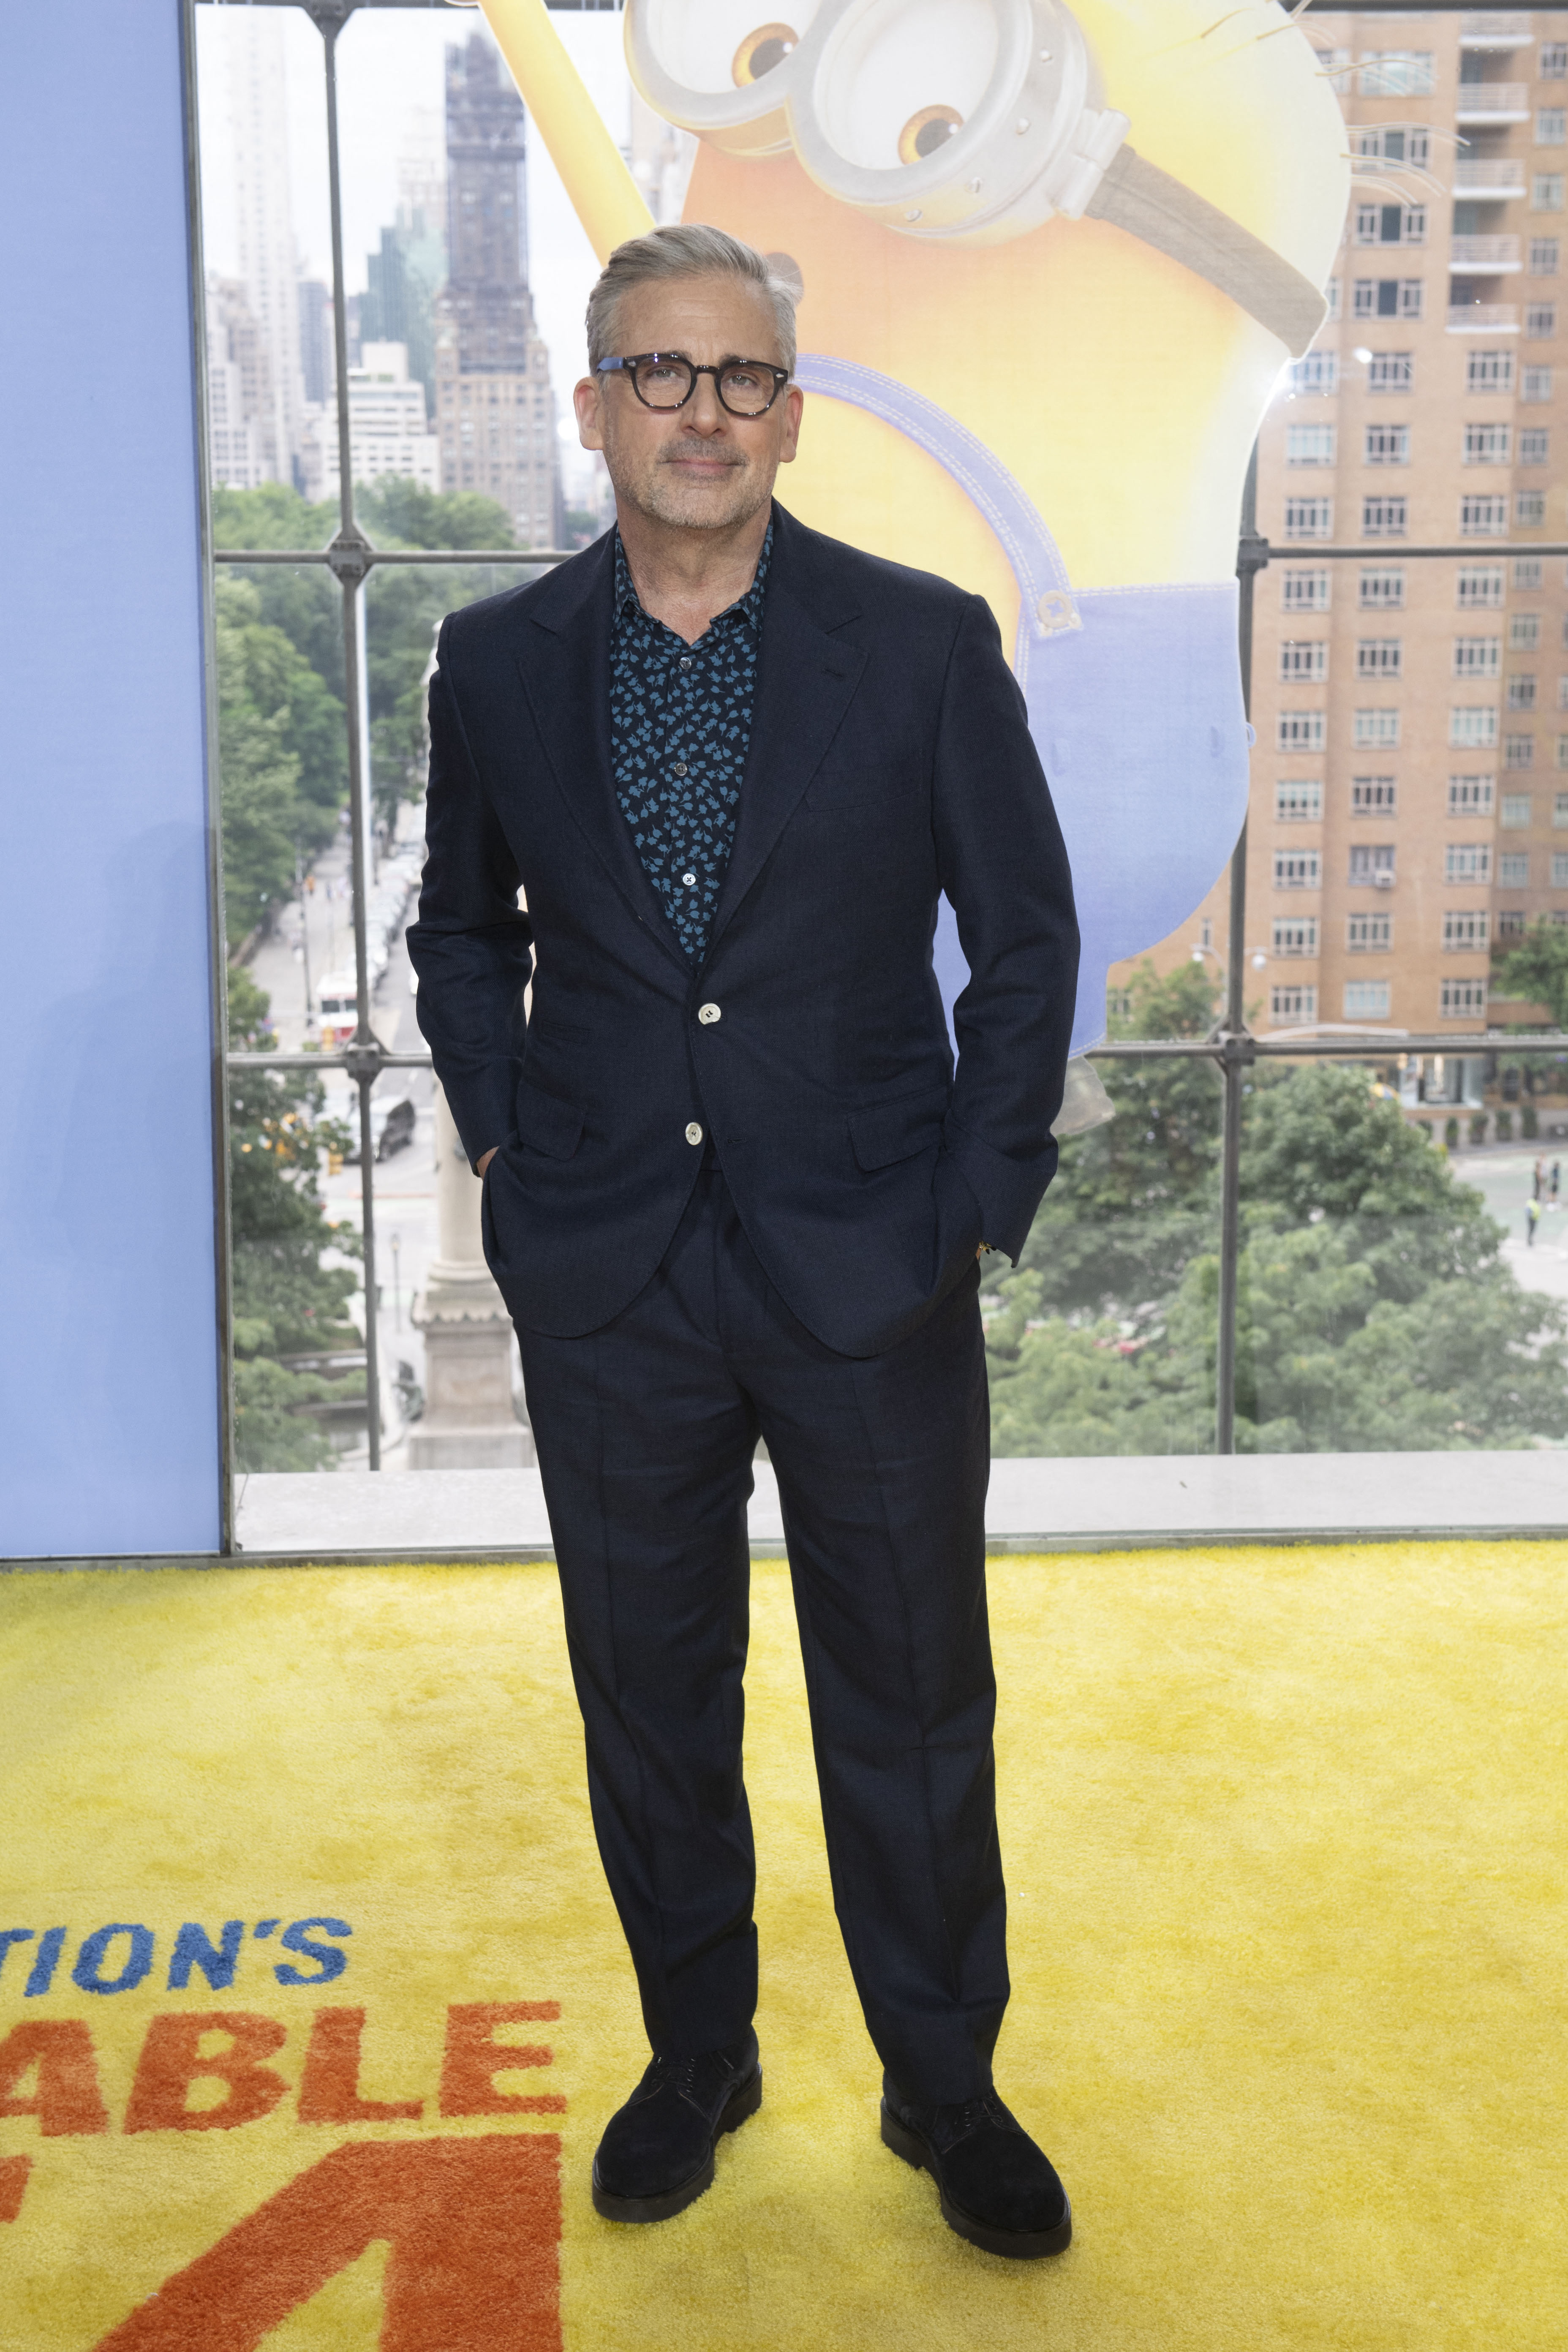 Steve Carell, seen in a sharp black suit with a blue undershirt at the Despicable Me 4 premiere in June 2024, has voiced Gru since the franchise started